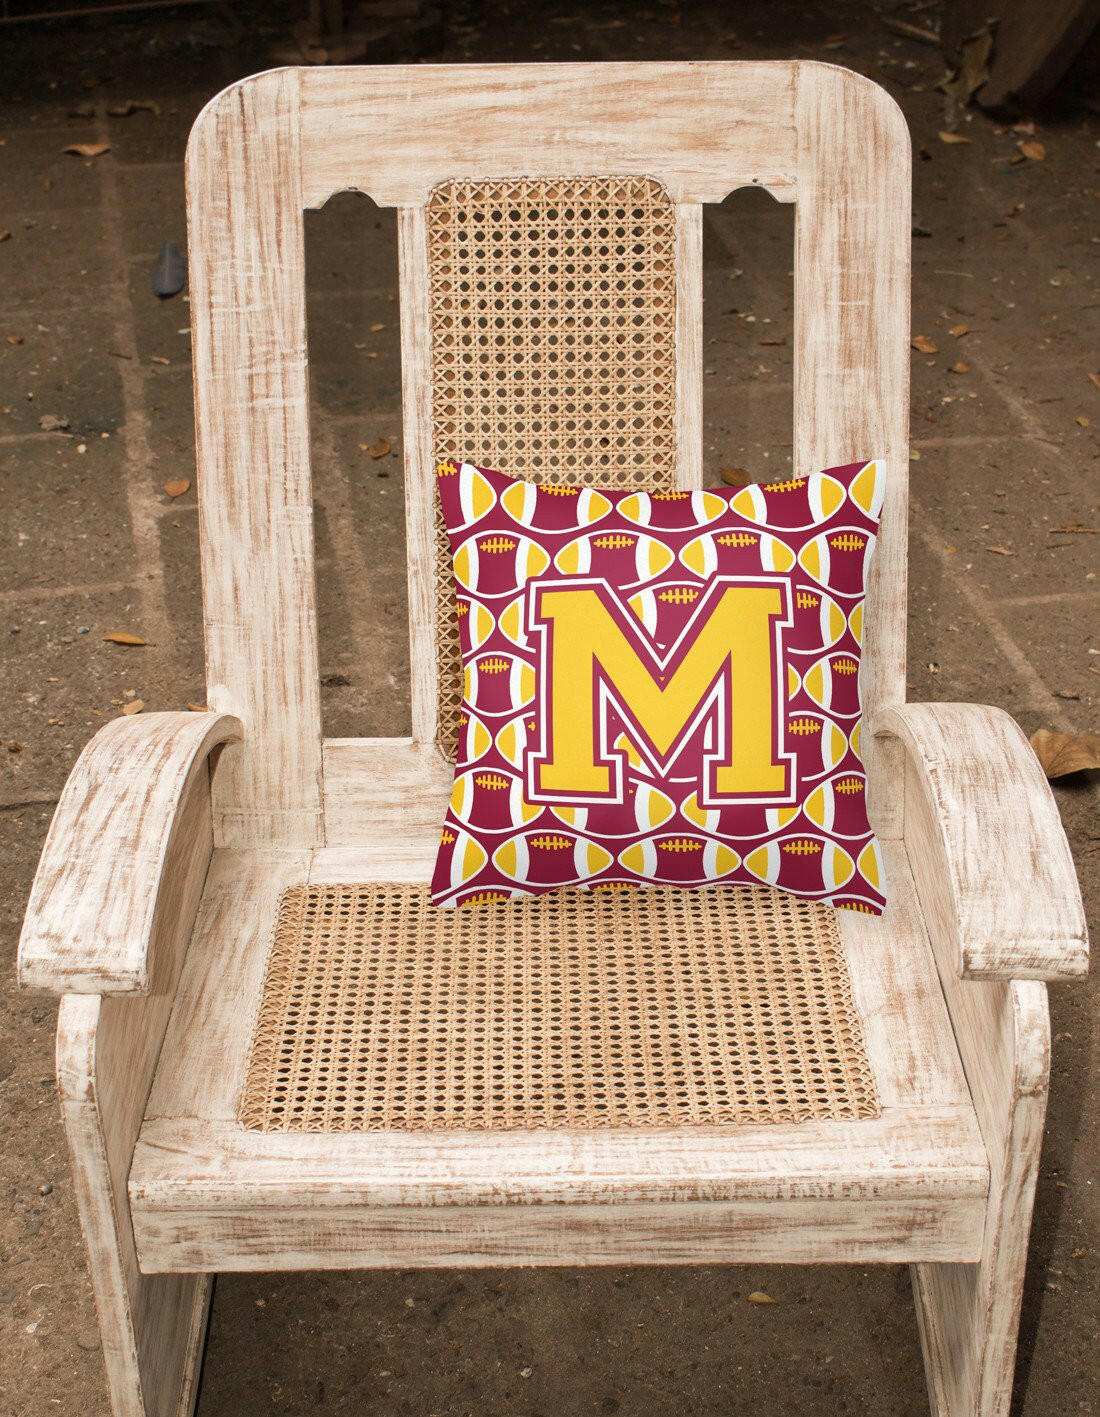 Letter M Football Maroon and Gold Fabric Decorative Pillow CJ1081-MPW1414 by Caroline's Treasures